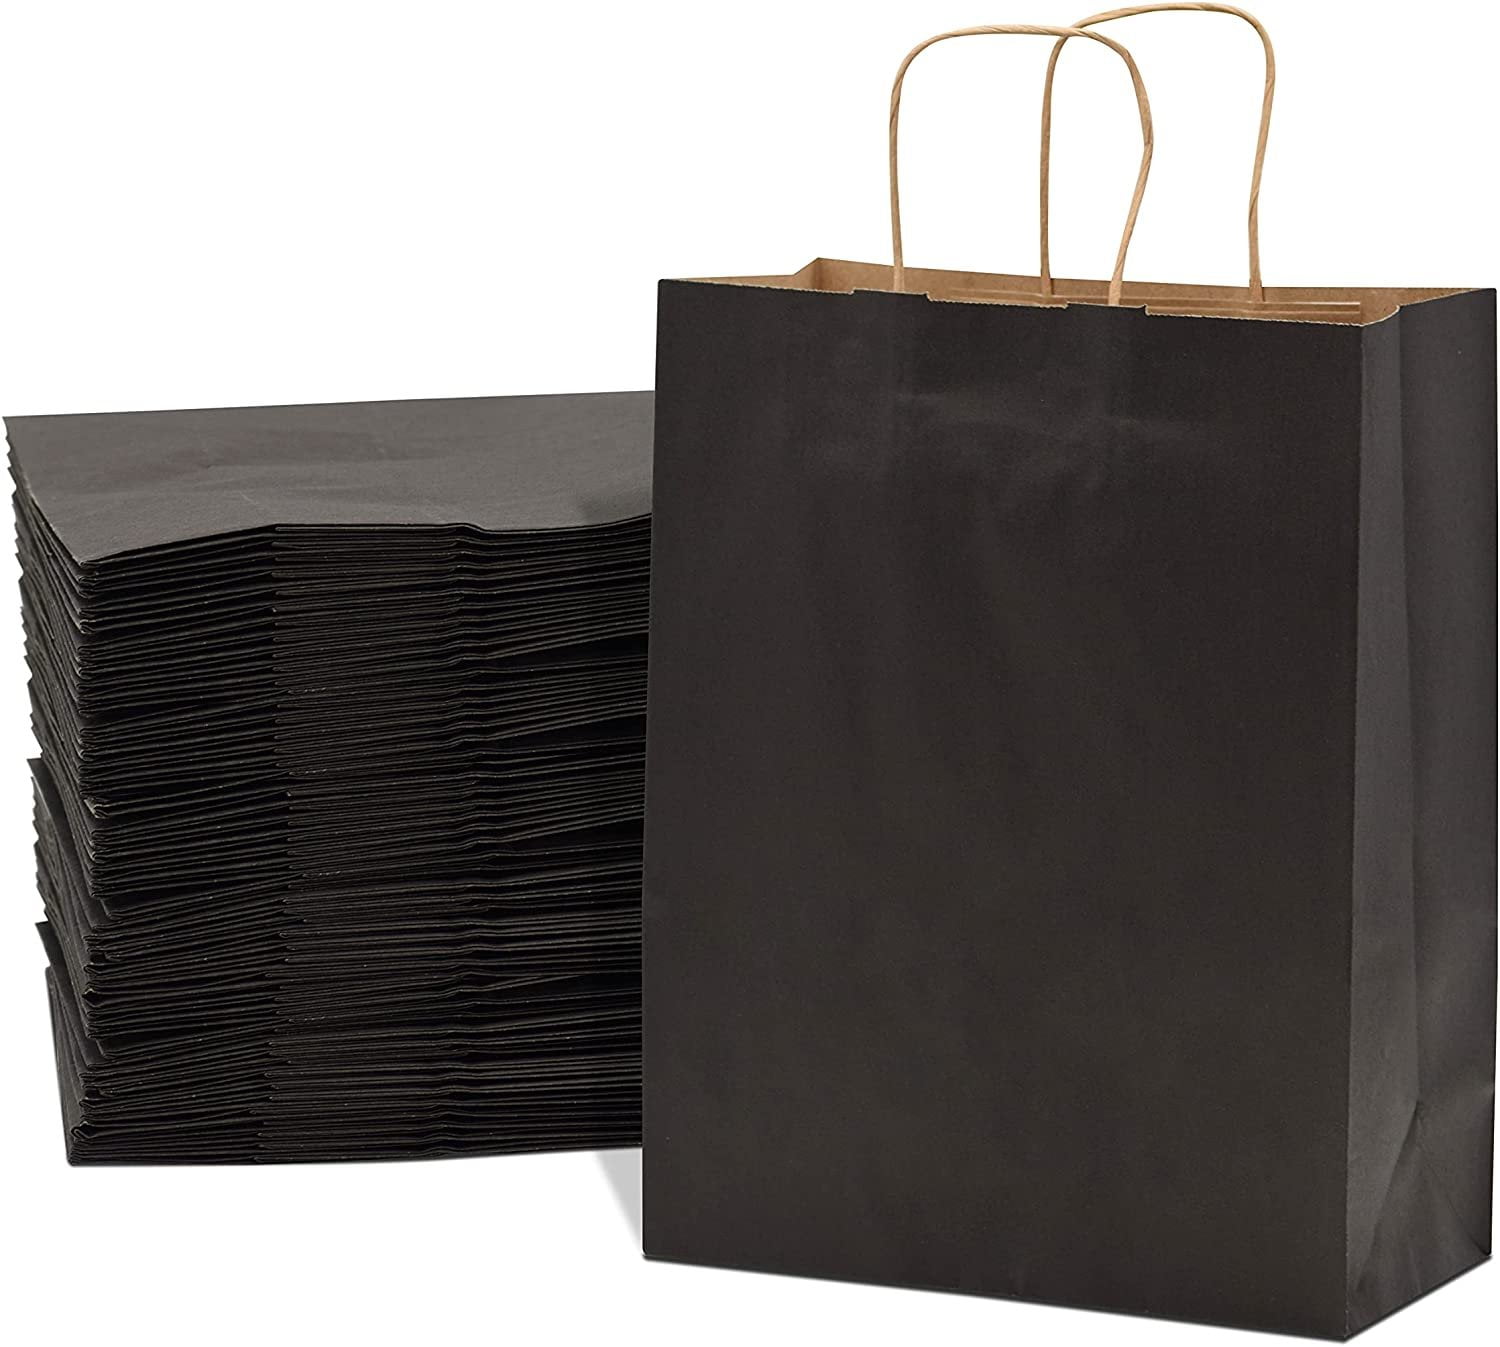 Prime Line Packaging- Paper Gift Bags with Handles for All 25 Pcs 10x5x13 - Walmart.com